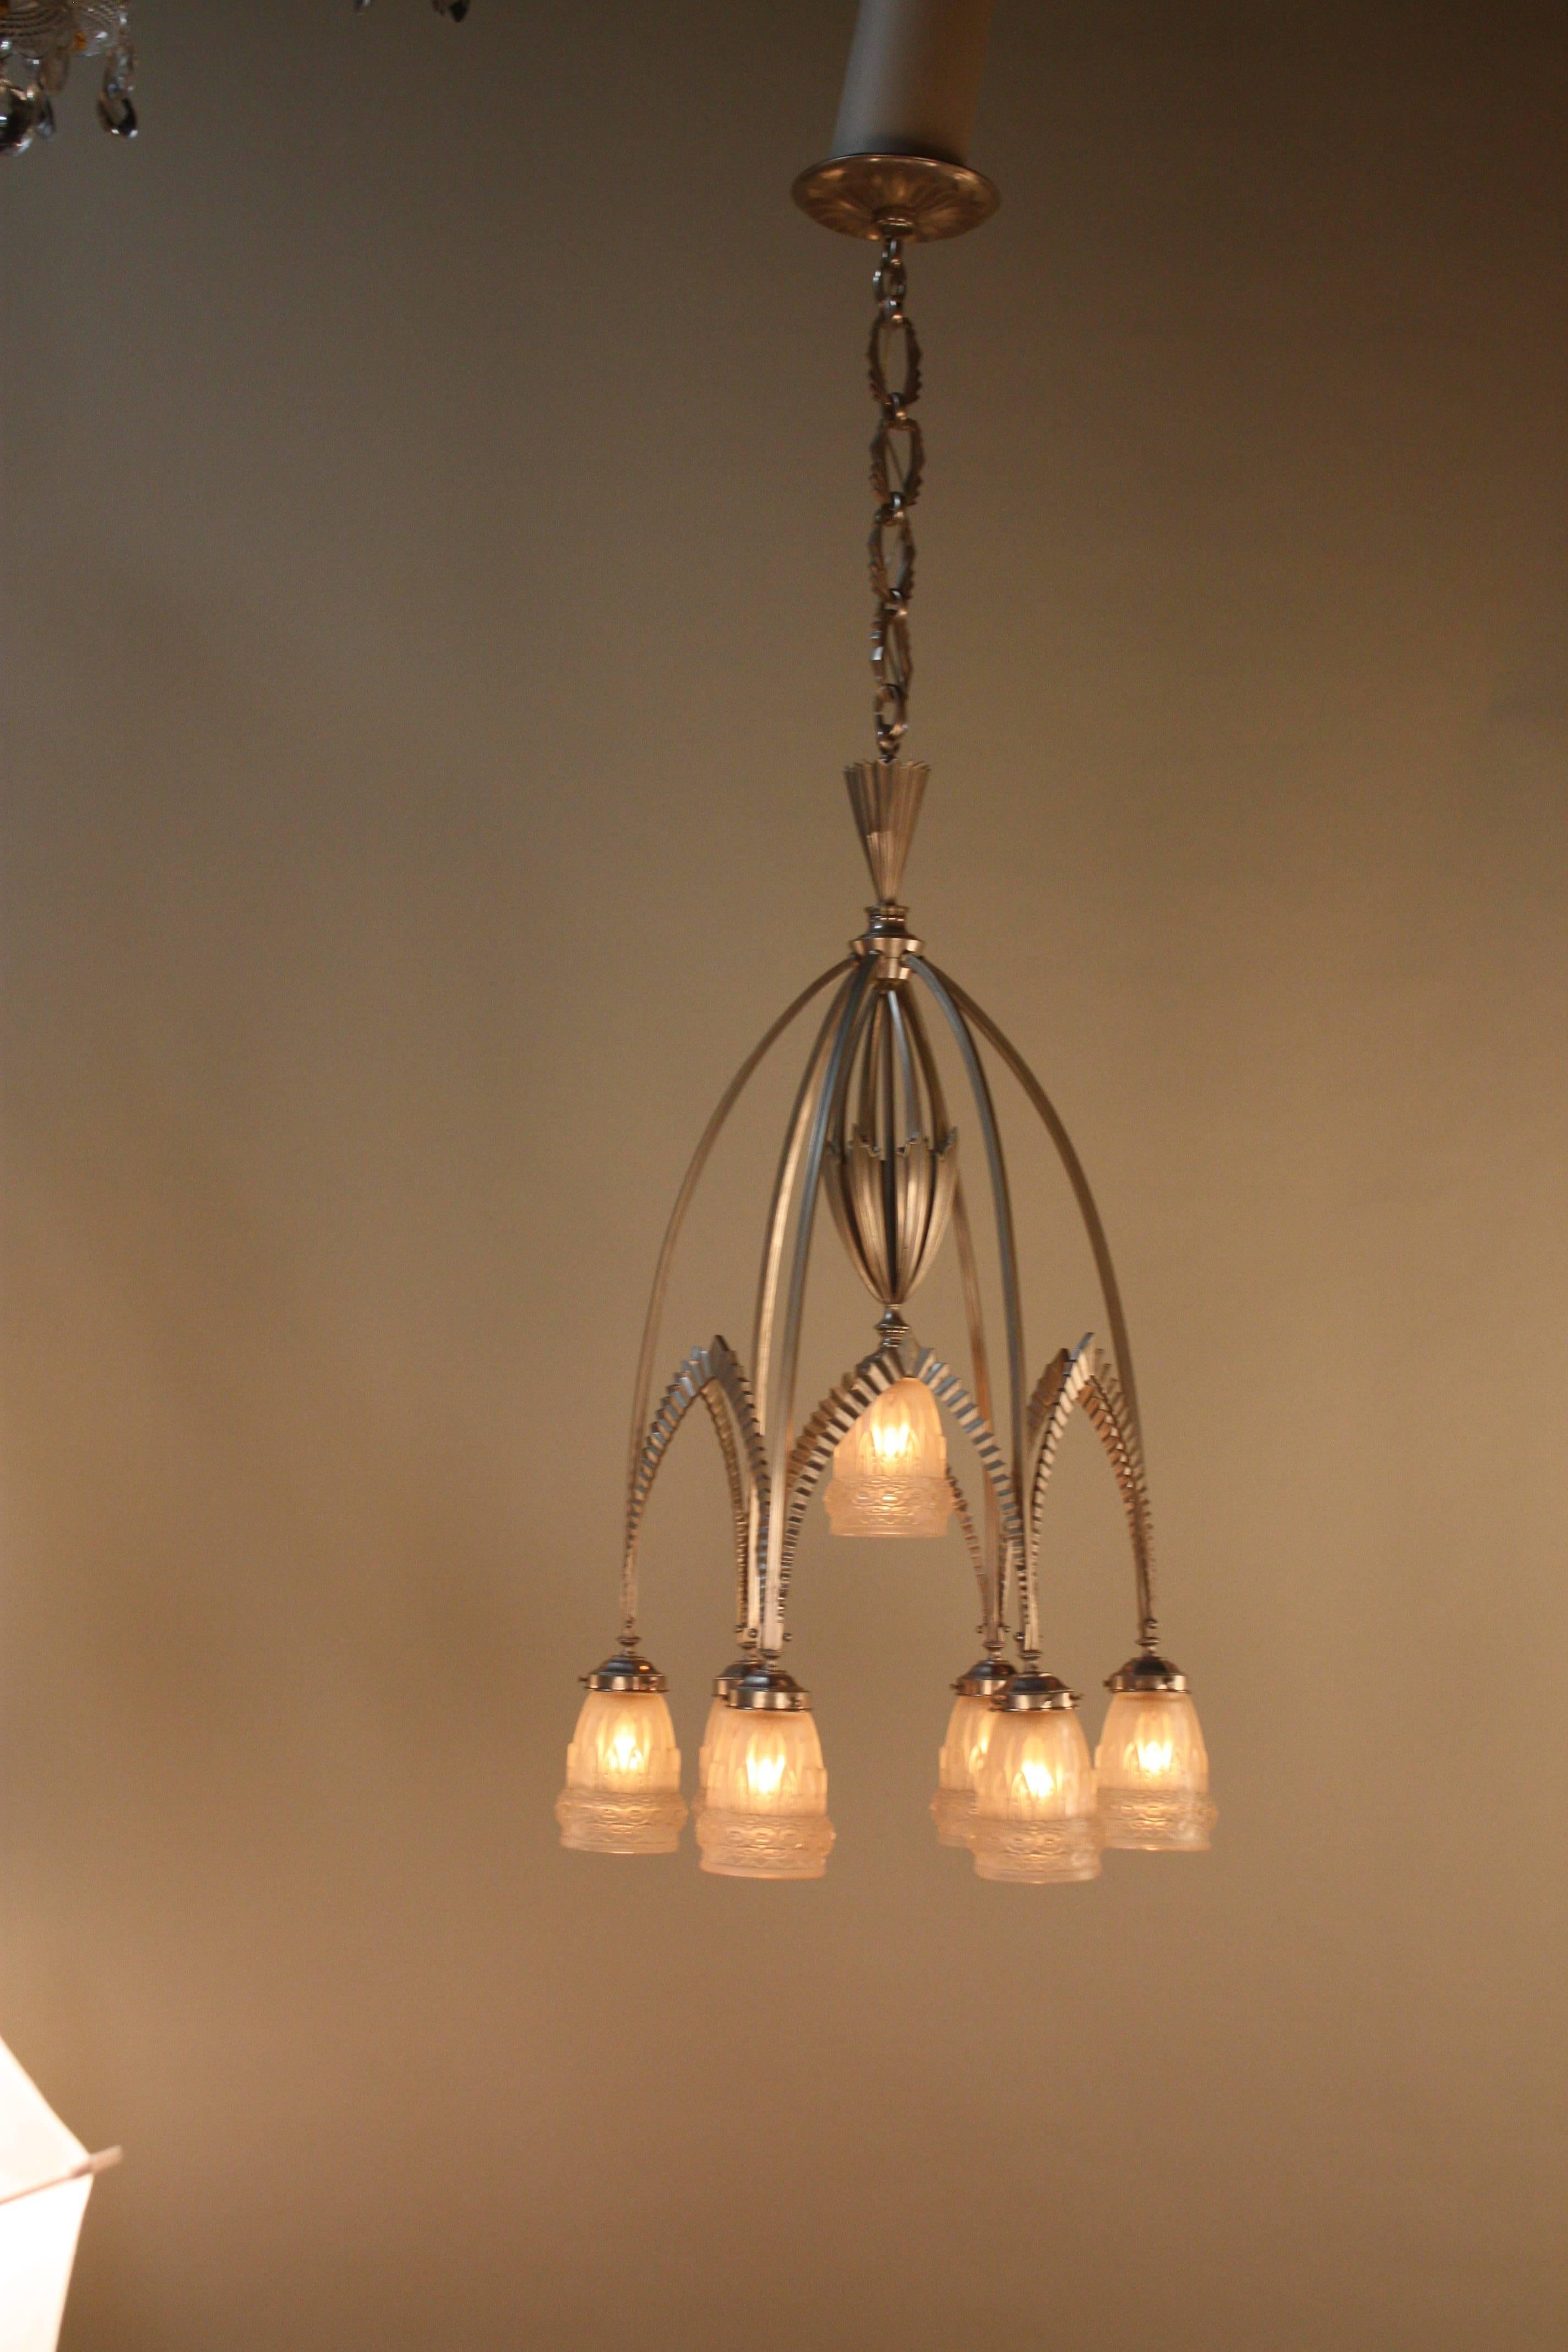 Seven heavy clear frost with high polished glass shades with nickel on bronze frame chandelier.